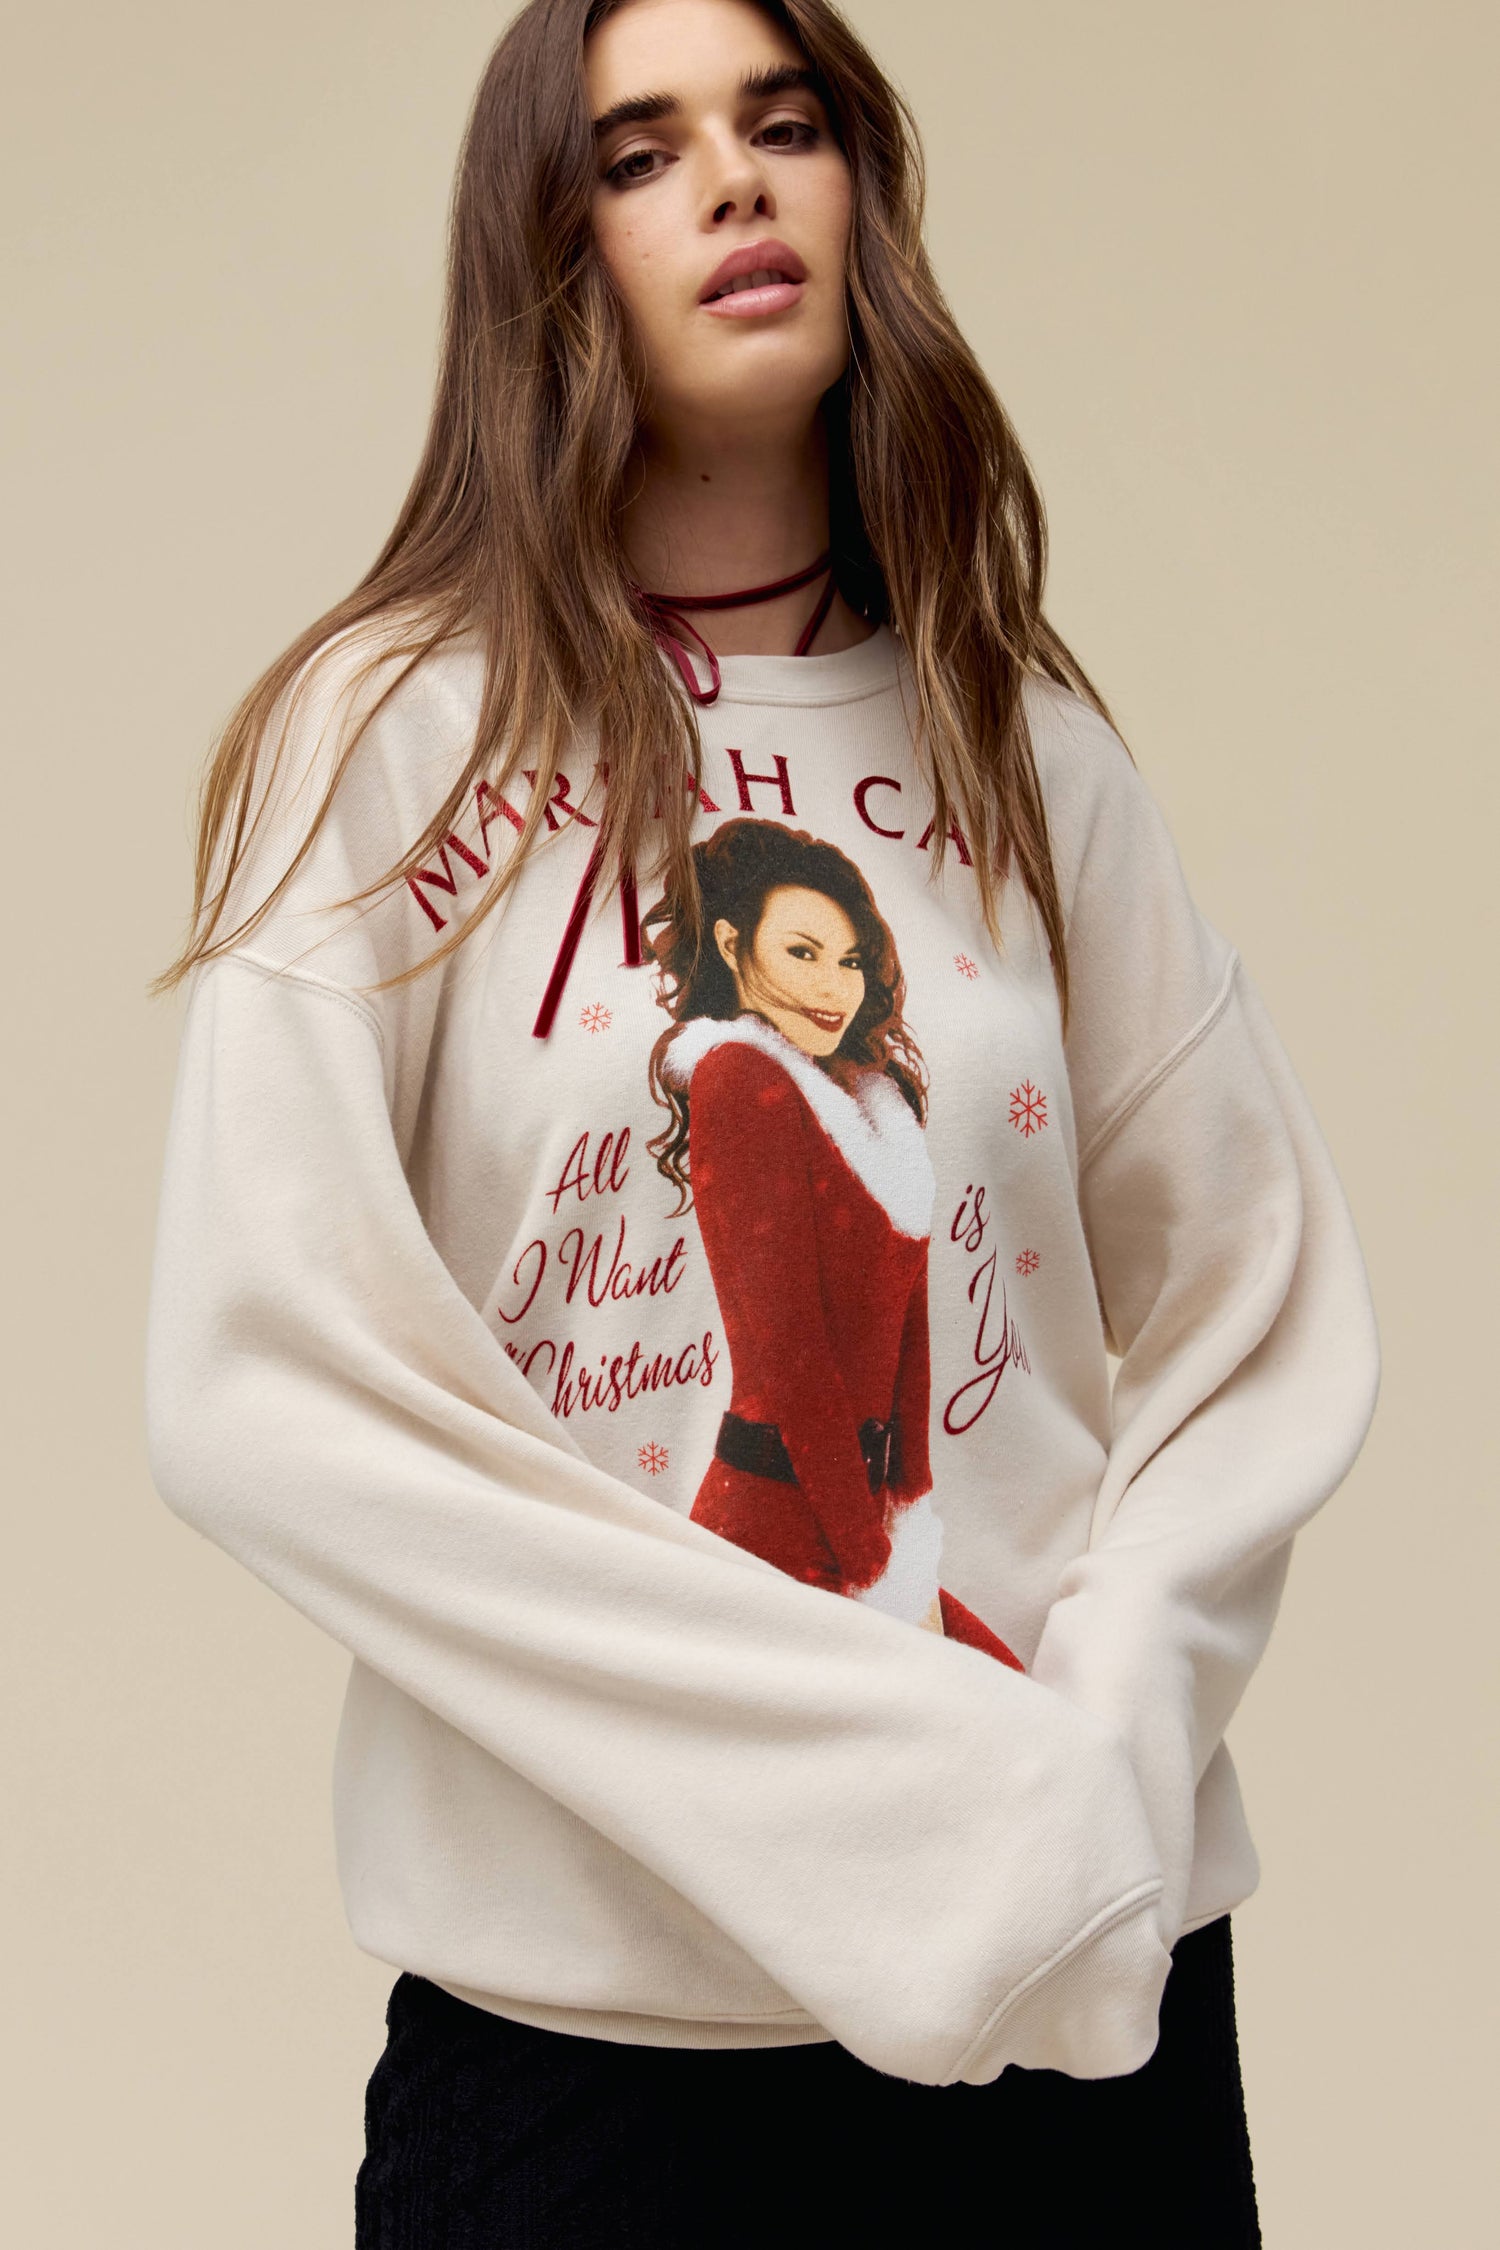 Model wearing a Mariah Carey tri-blend fleece sweatshirt featuring 'All I Want for Christmas is You' portrait artwork